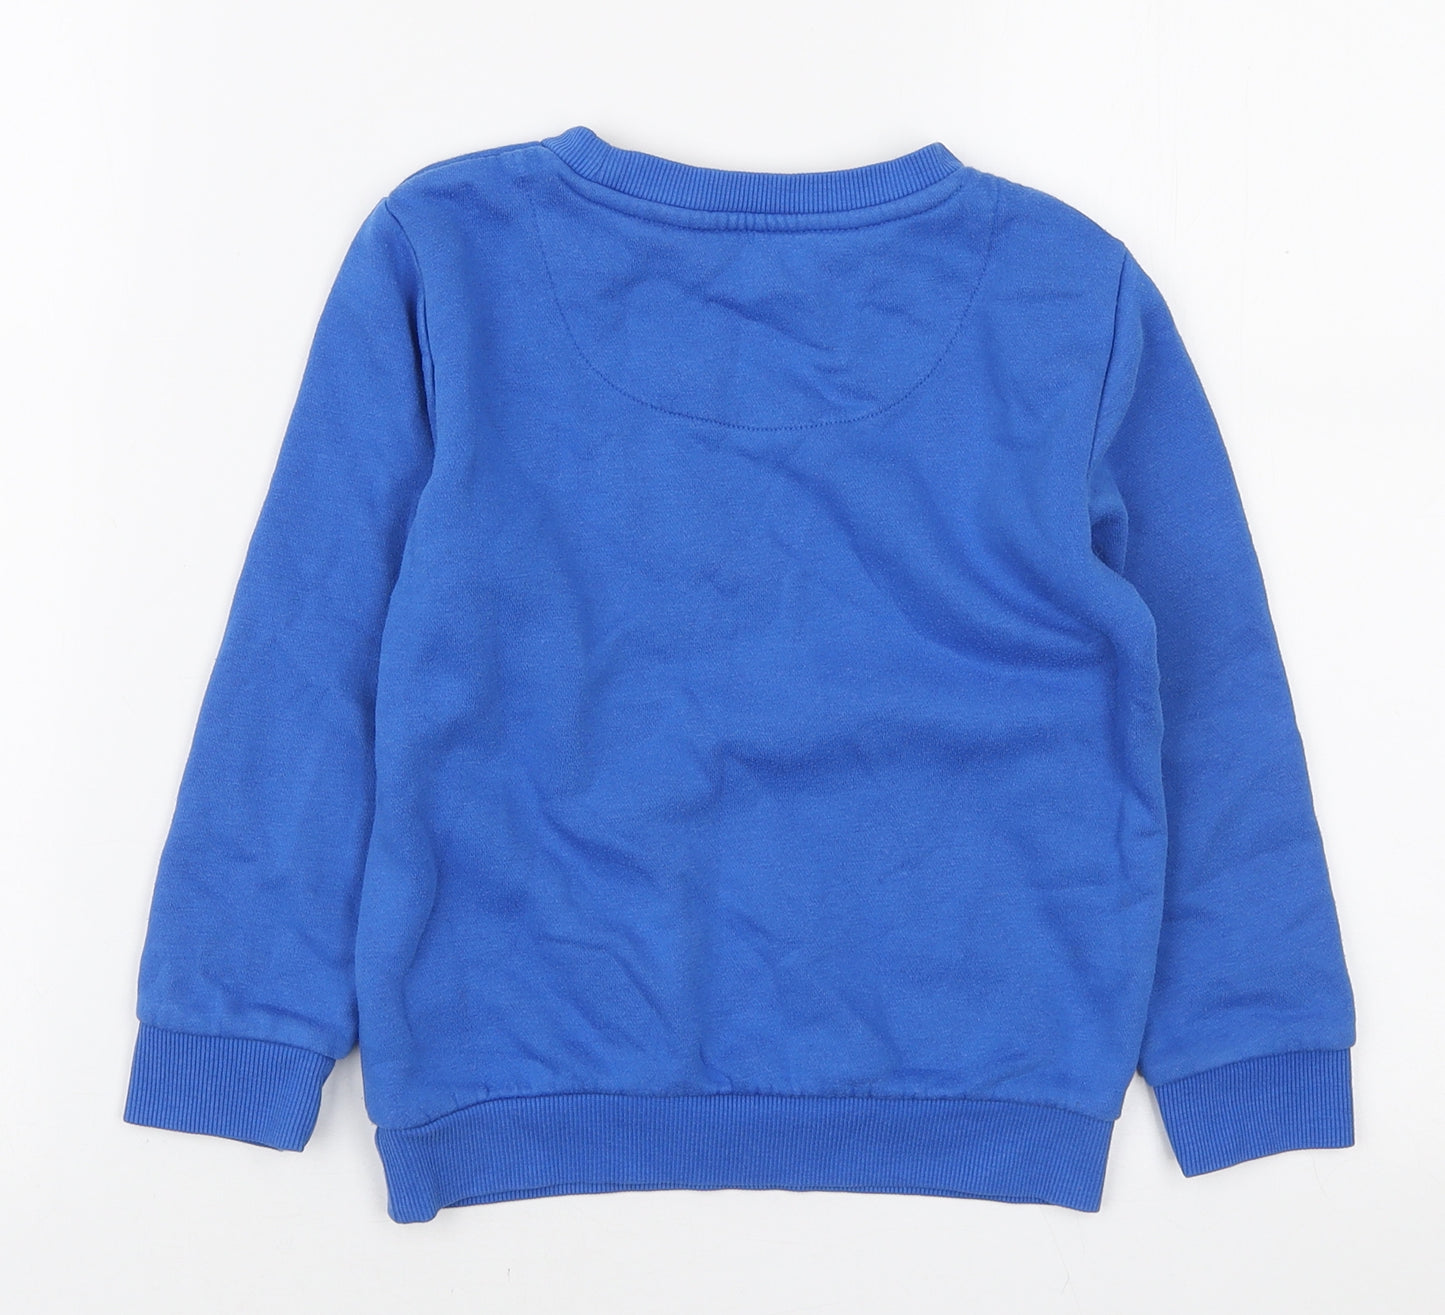 F&F Boys Blue Cotton Pullover Sweatshirt Size 5-6 Years Pullover - Bear Face